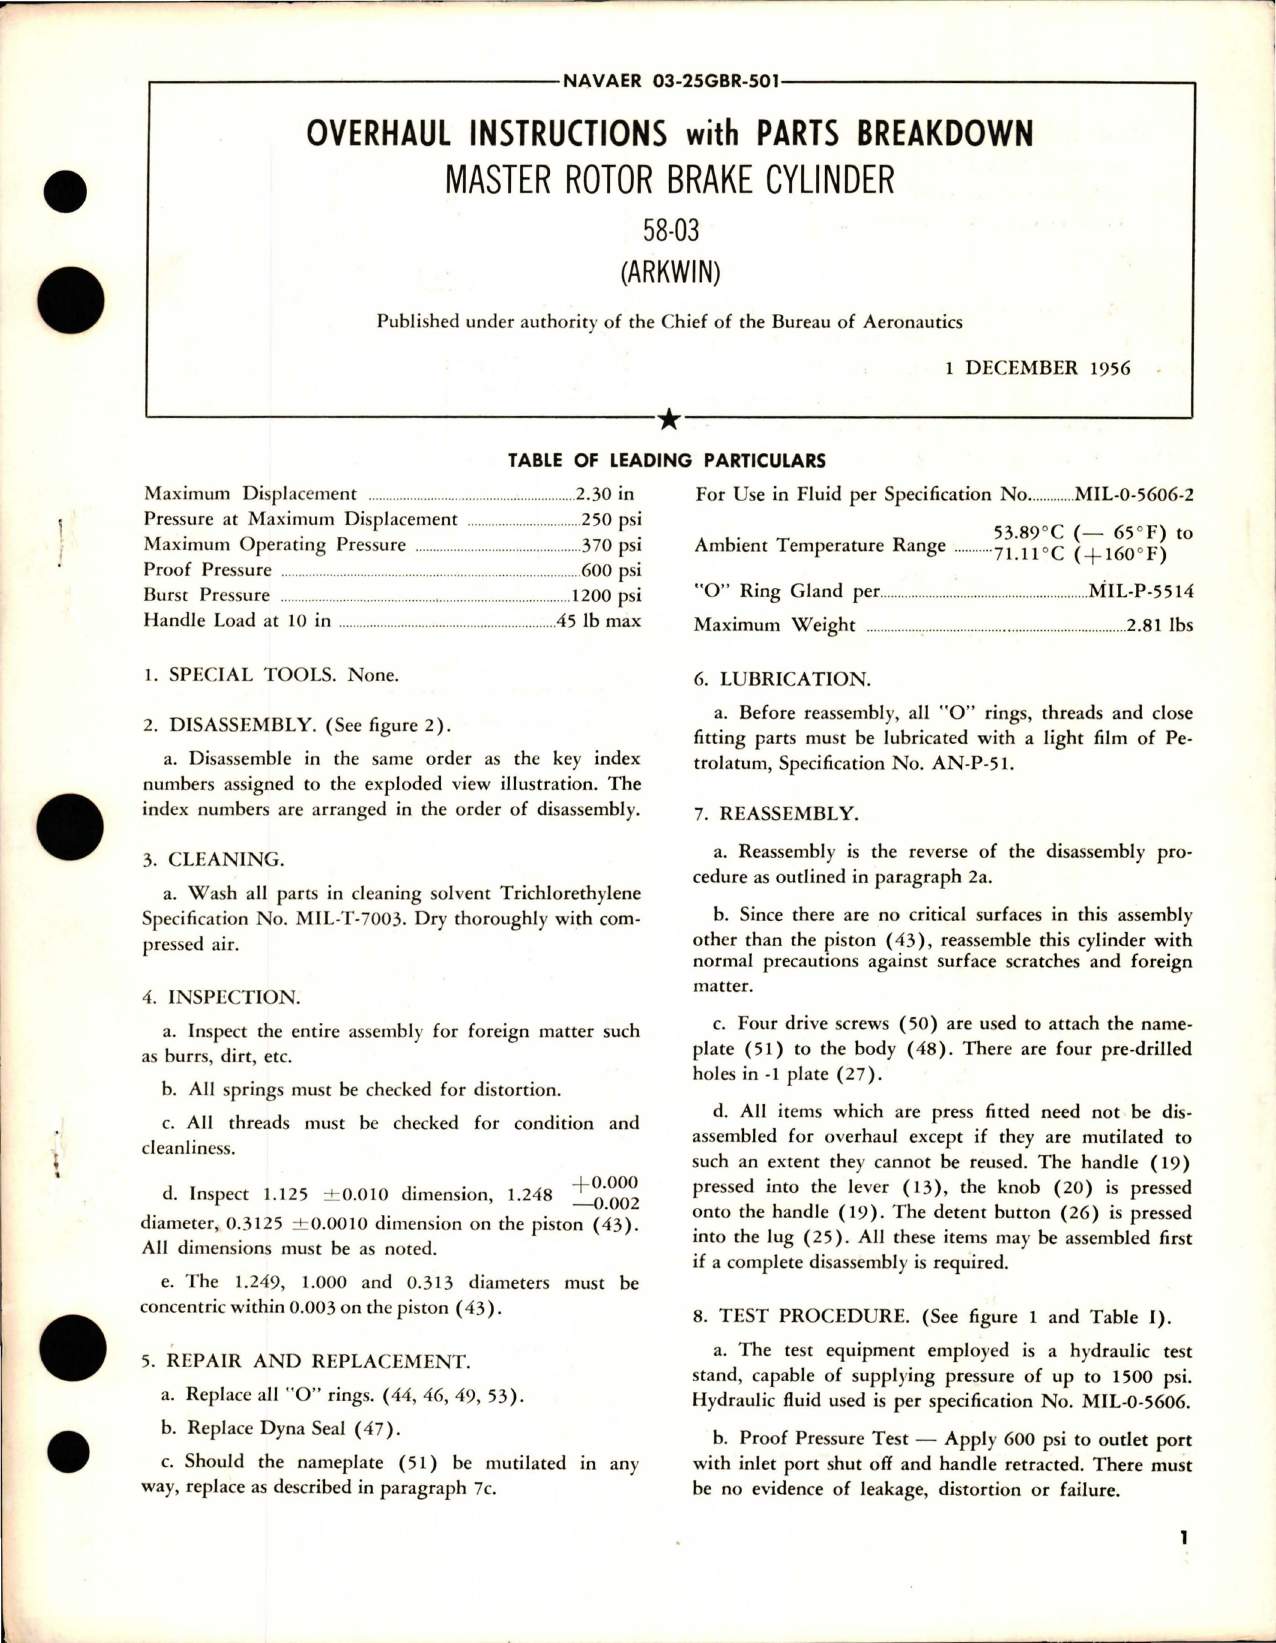 Sample page 1 from AirCorps Library document: Overhaul Instructions with Parts Breakdown for Master Rotor Brake Cylinder - 58-03 